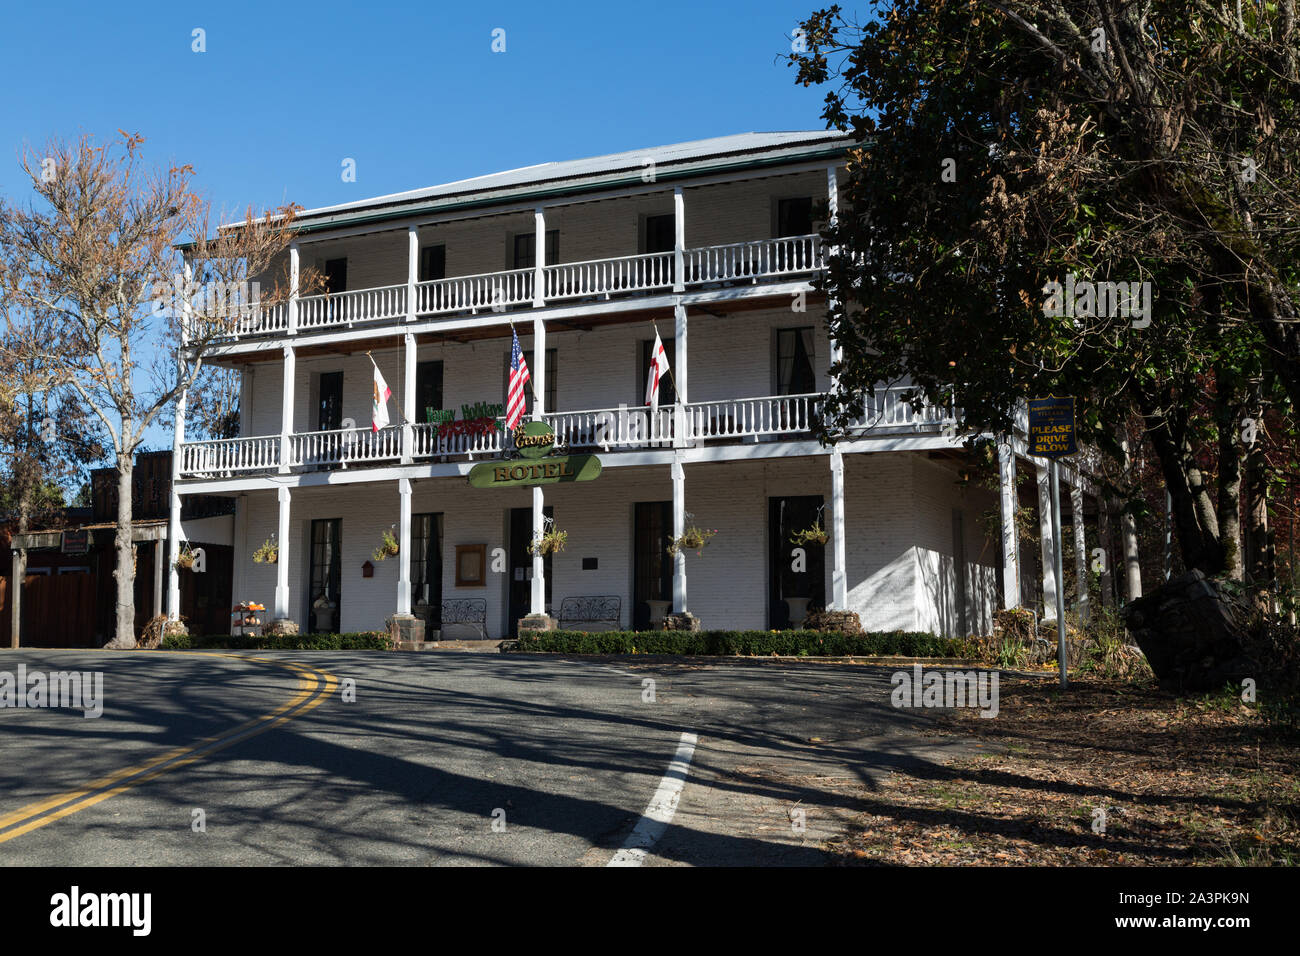 St. George Hotel, the largest structure in the town of Volcano in Amador County, California Stock Photo